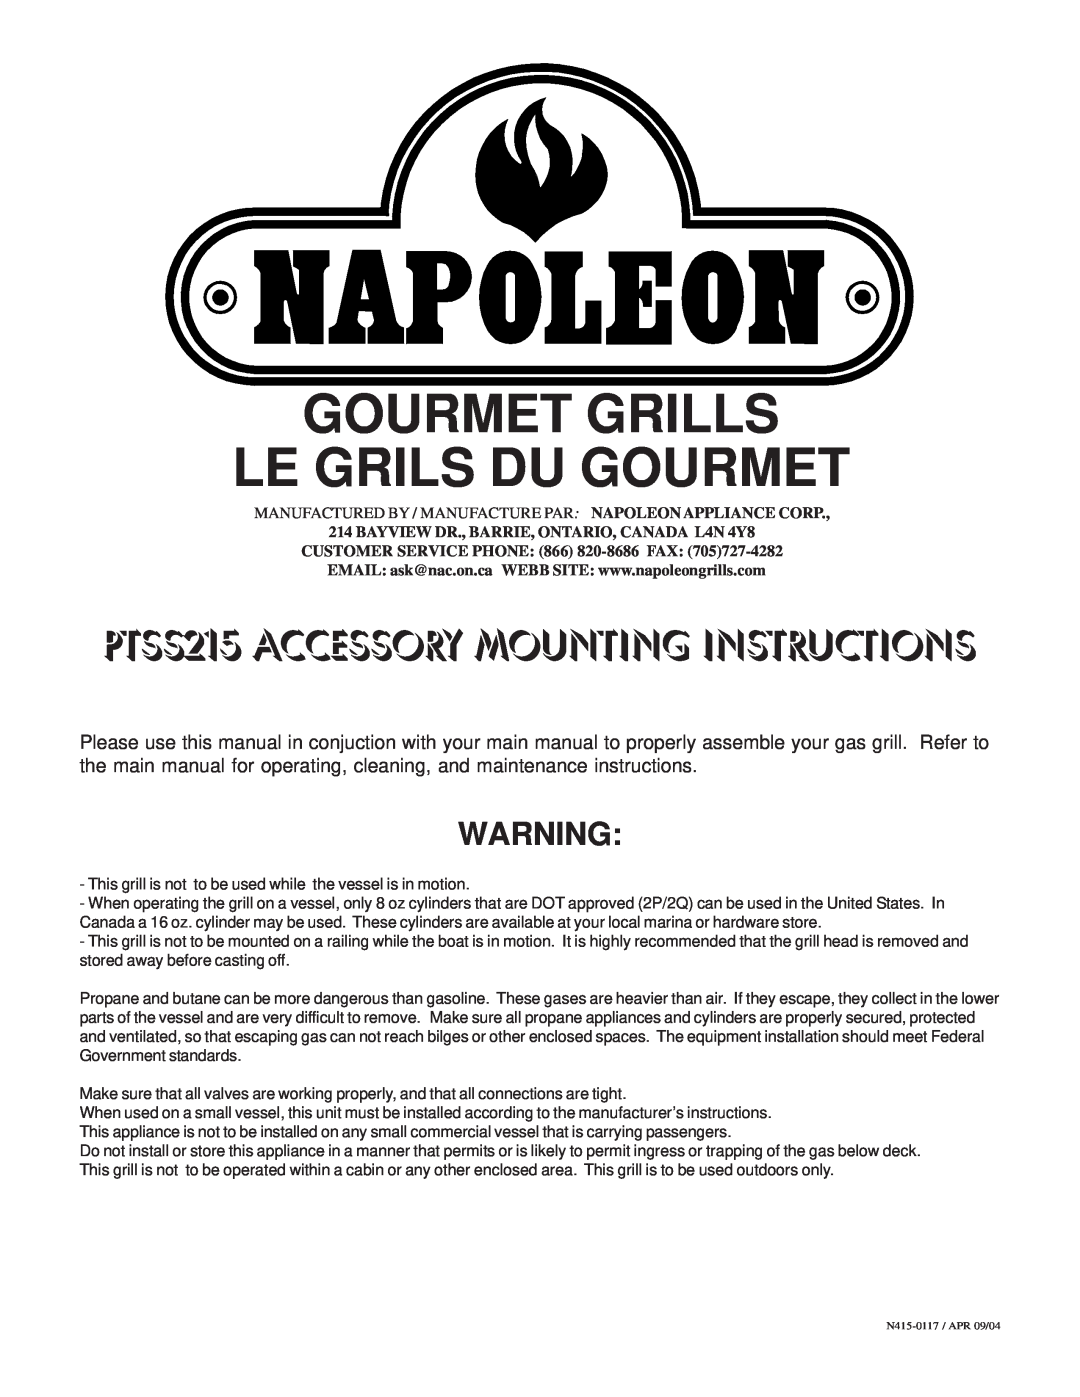 Napoleon Grills N415-0117 manual Gourmet Grills Le Grils Du Gourmet, PTSS215 ACCESSORY MOUNTING INSTRUCTIONS 